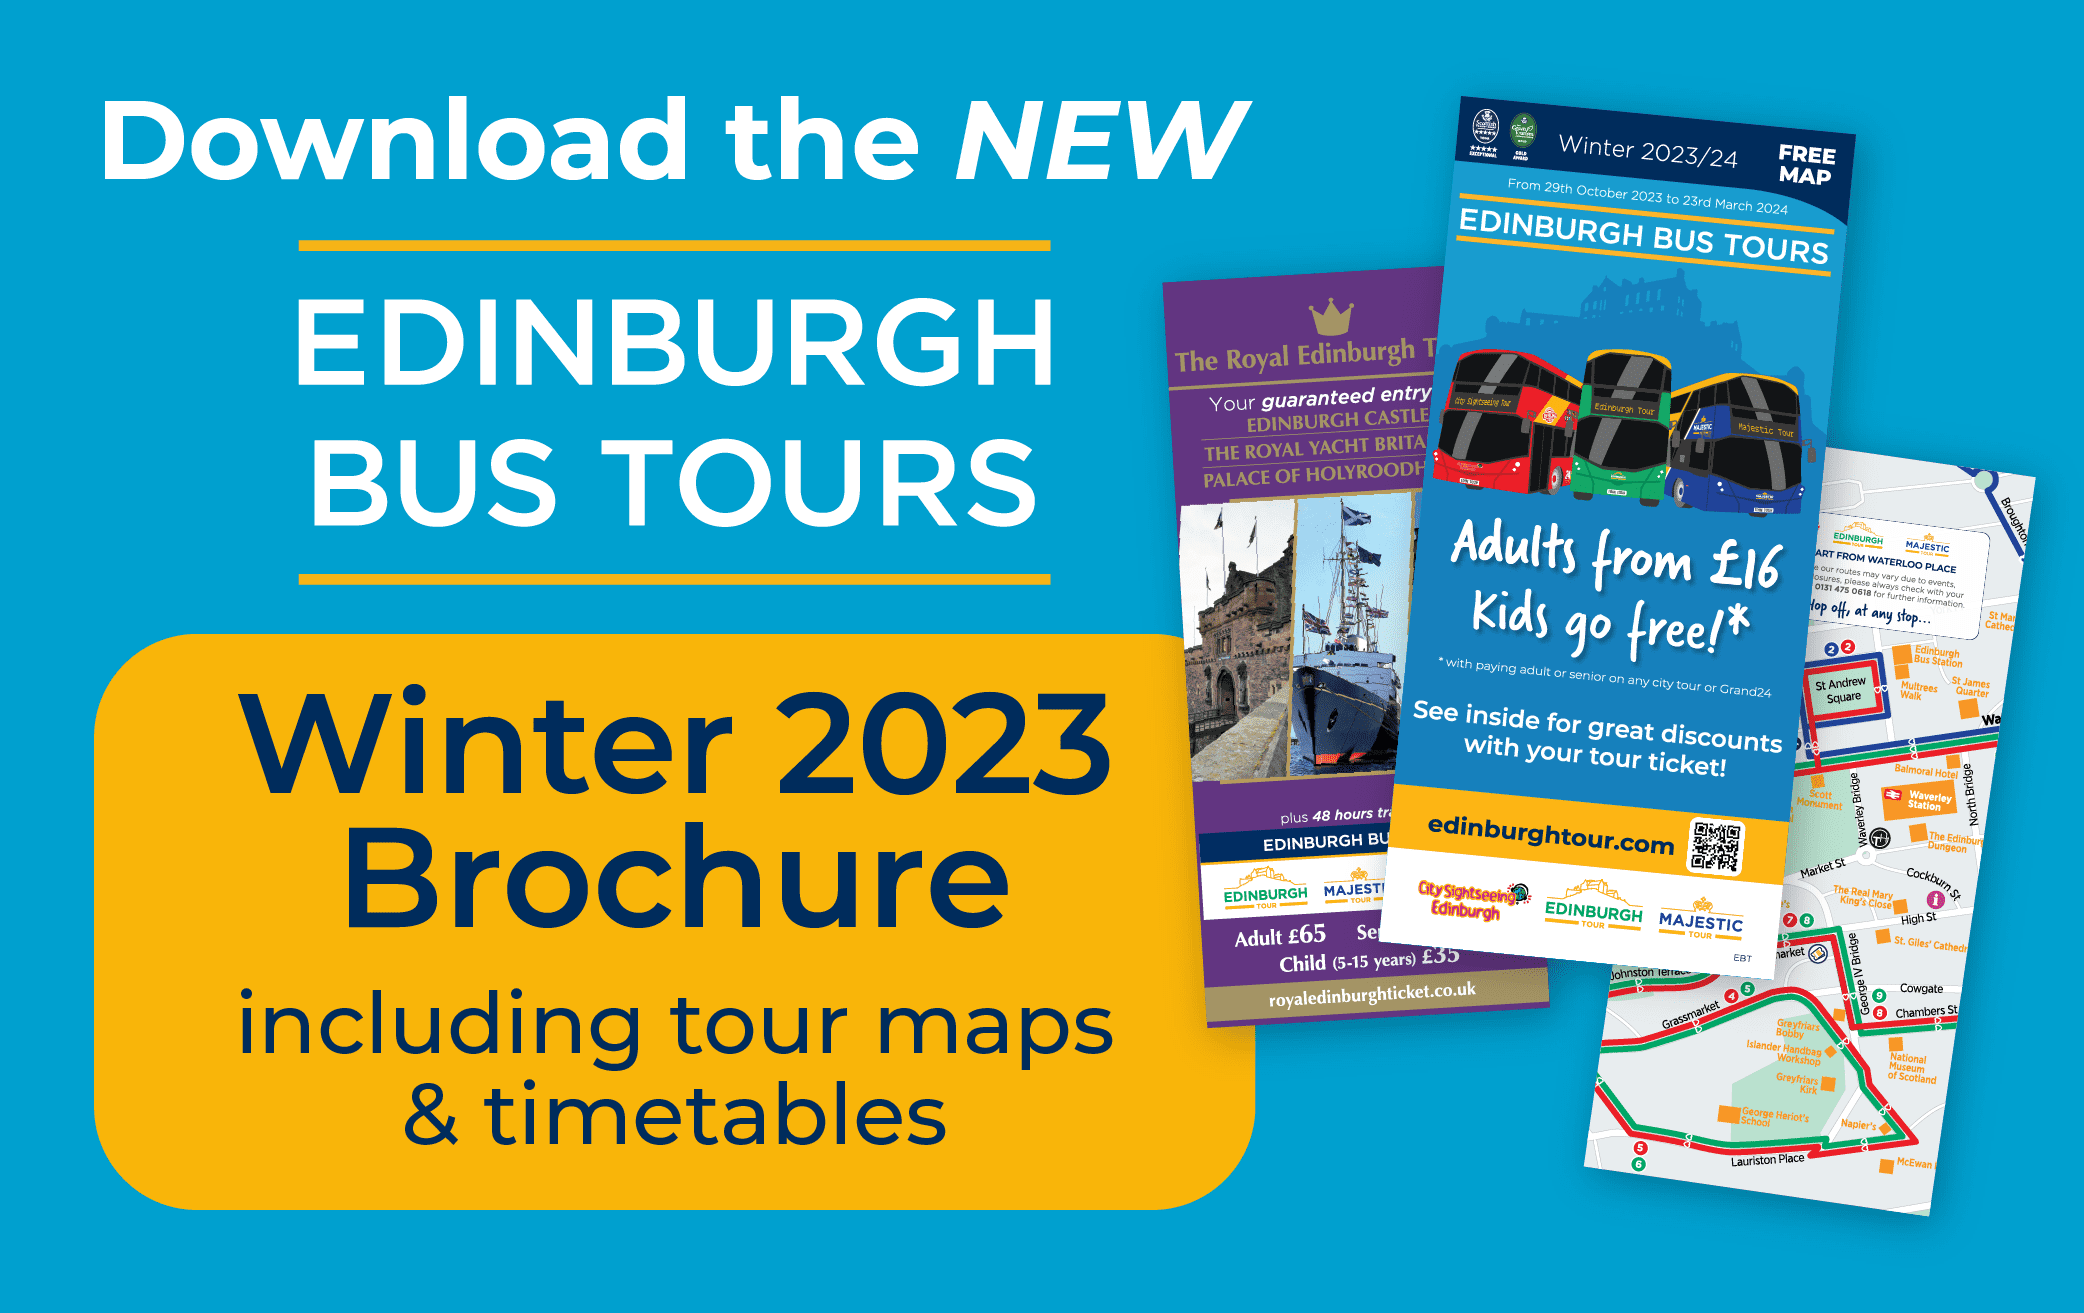 Click to download the new Edinburgh Bus Tour Summer 2023 Guide